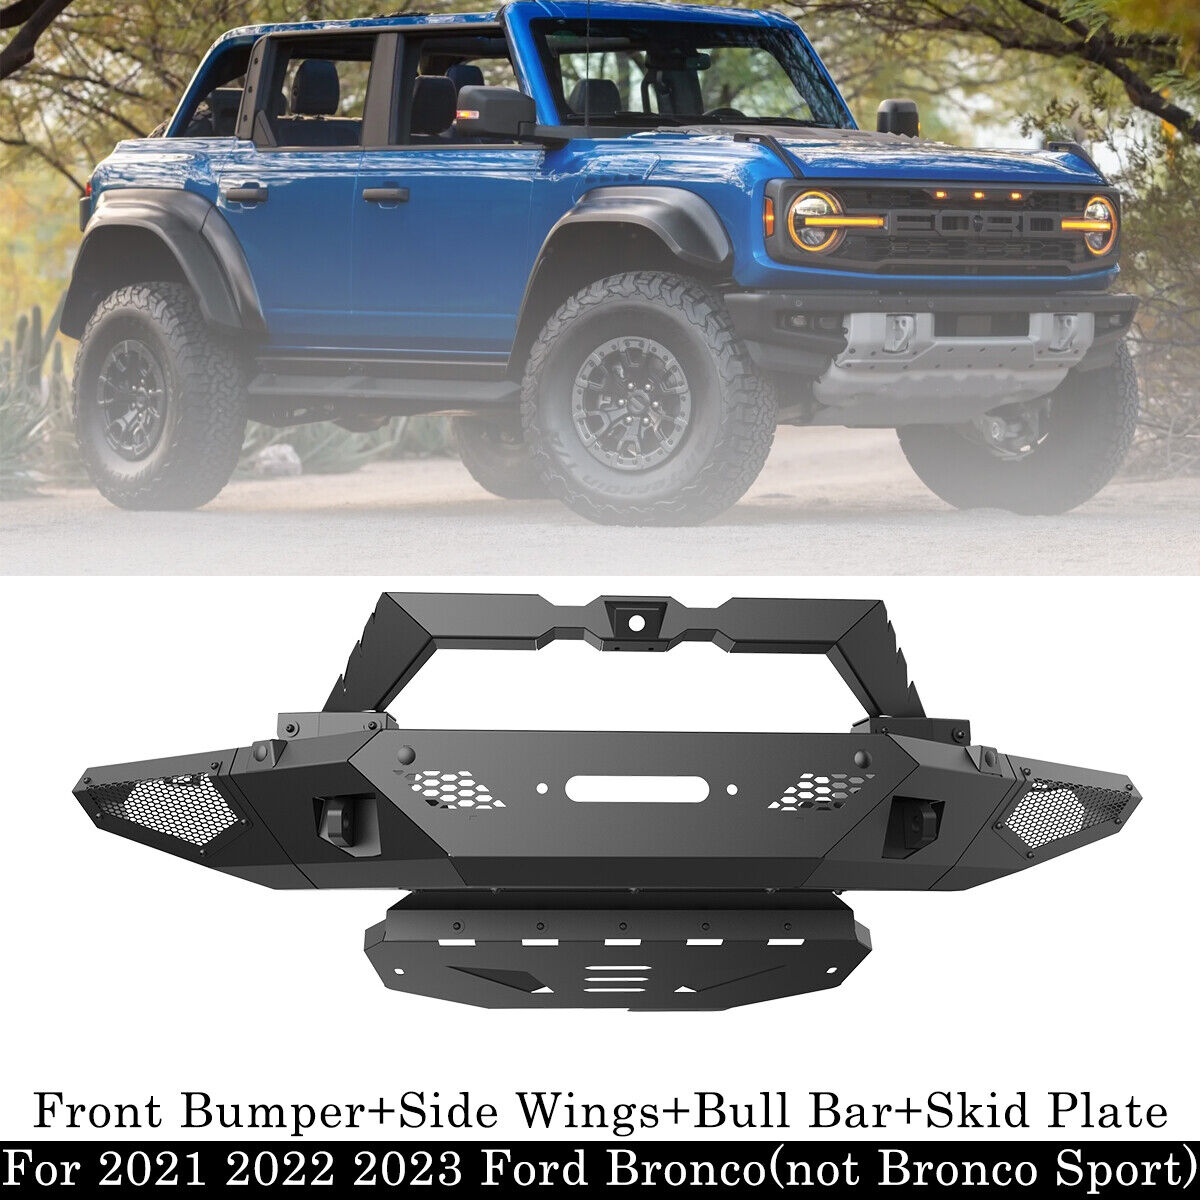 Ford Bronco Front Bumper For 2021 2022 2023 2024 Ford Bronco Replacement Kits 